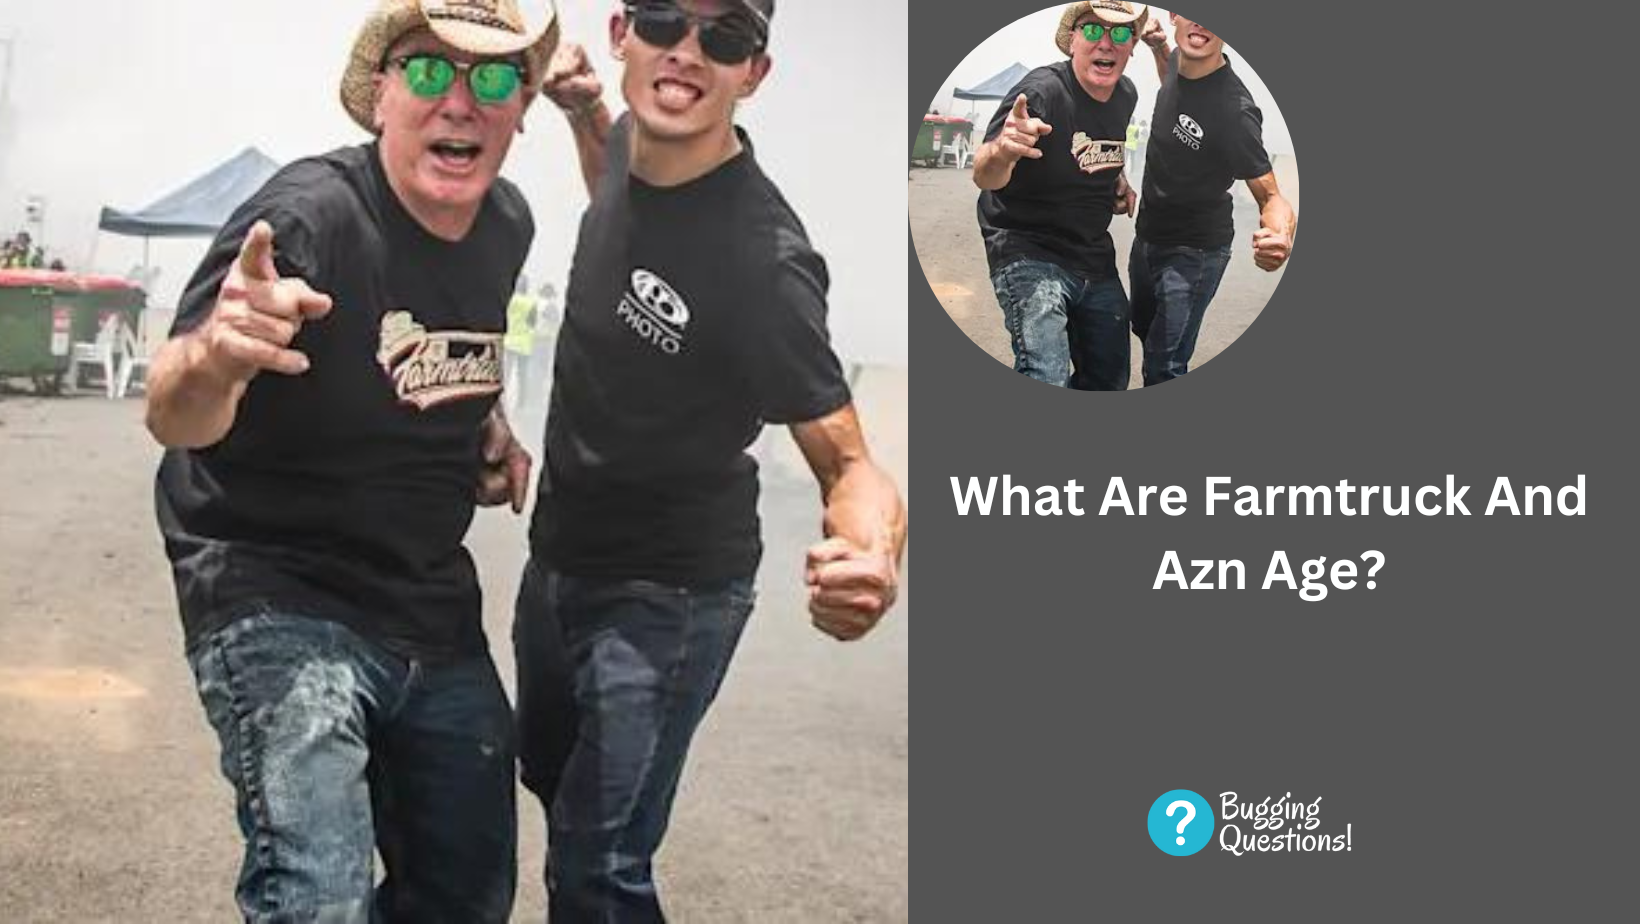 What Are Farmtruck And Azn Age?